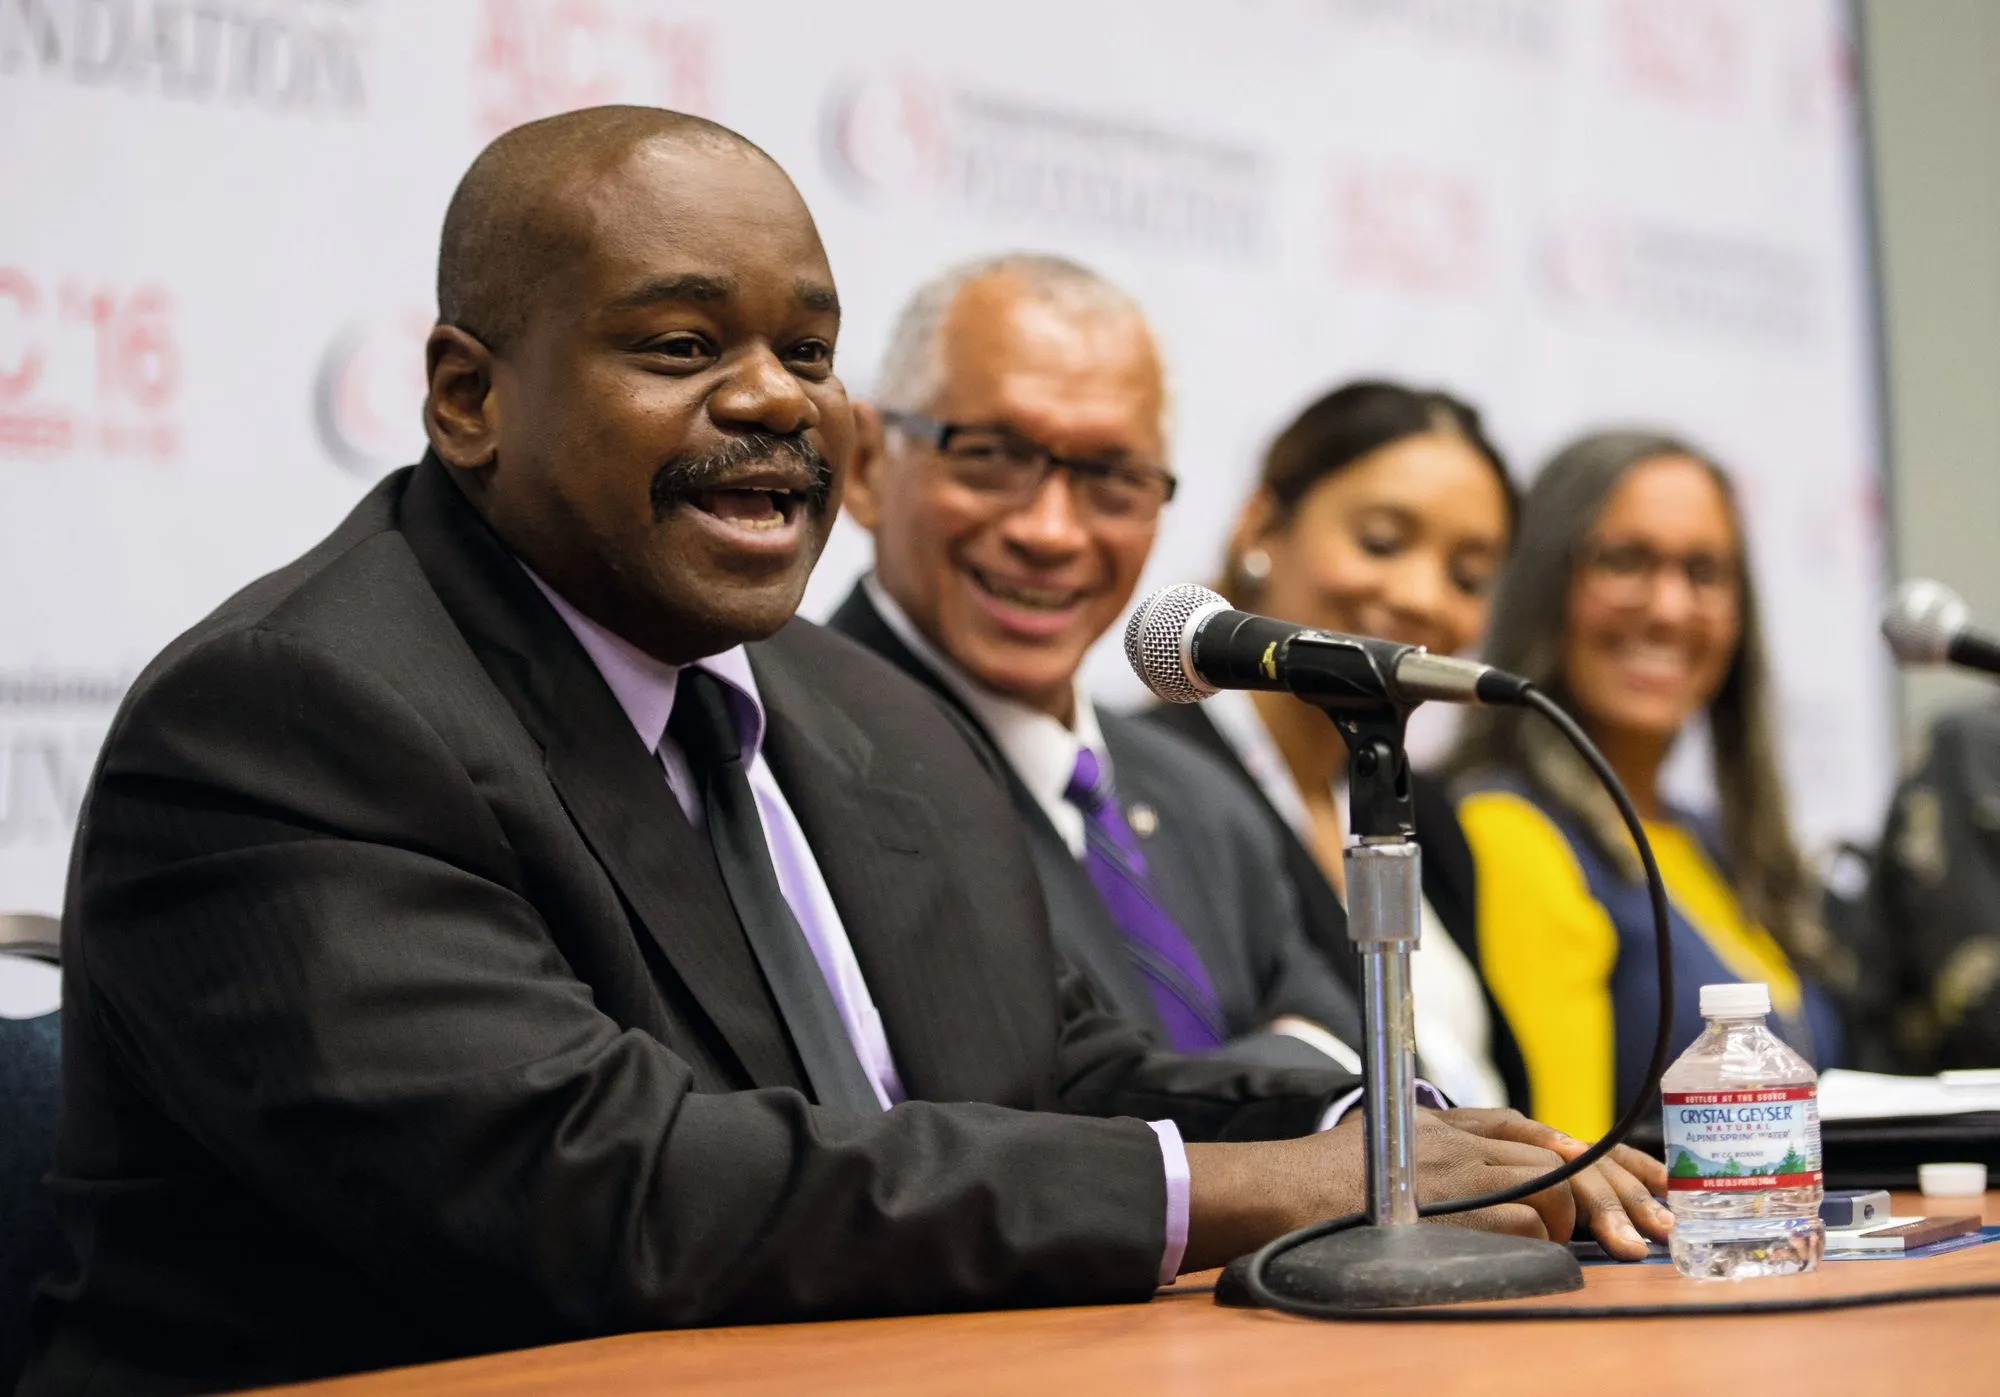 Rudy L. Horne participates in a panel discussion on Women in STEM, 2016.